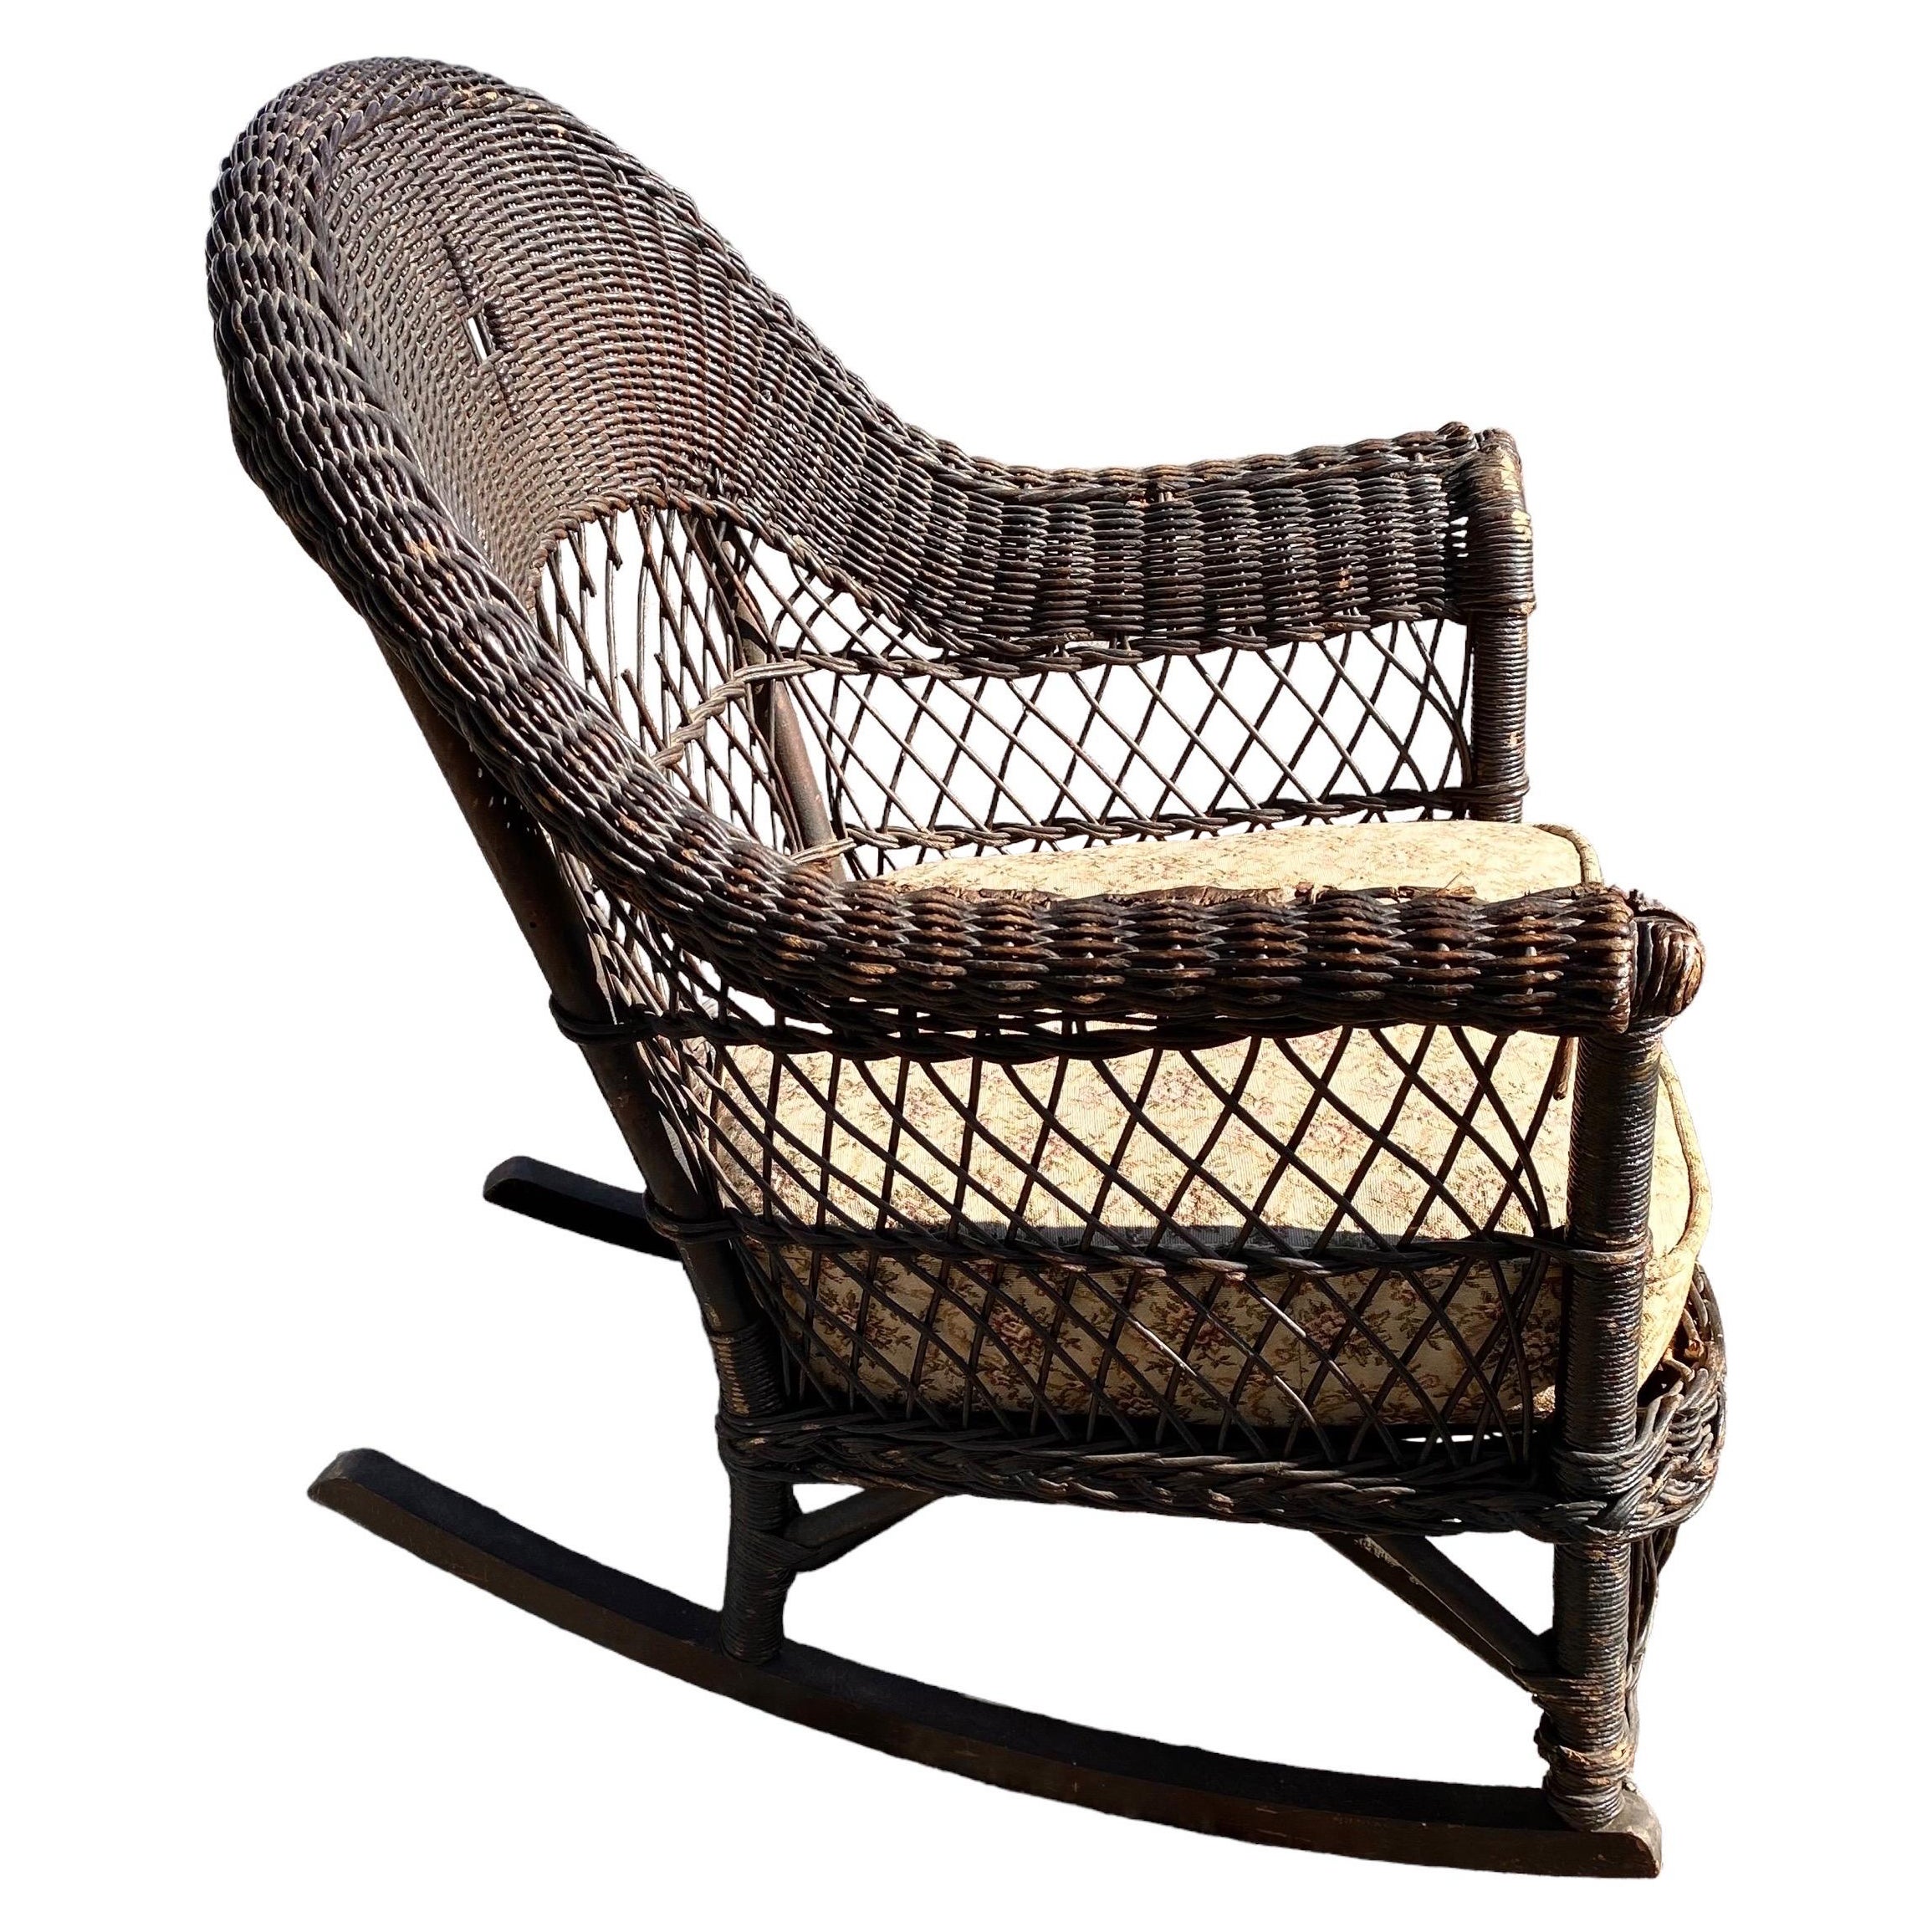 A charming early 20th century wicker rocker attributed to Jenkins & Phipps. Beautiful details and old original finish and is in remarkable condition considering its age and use, circa 1900. Would make a charming addition to your screed in porch or